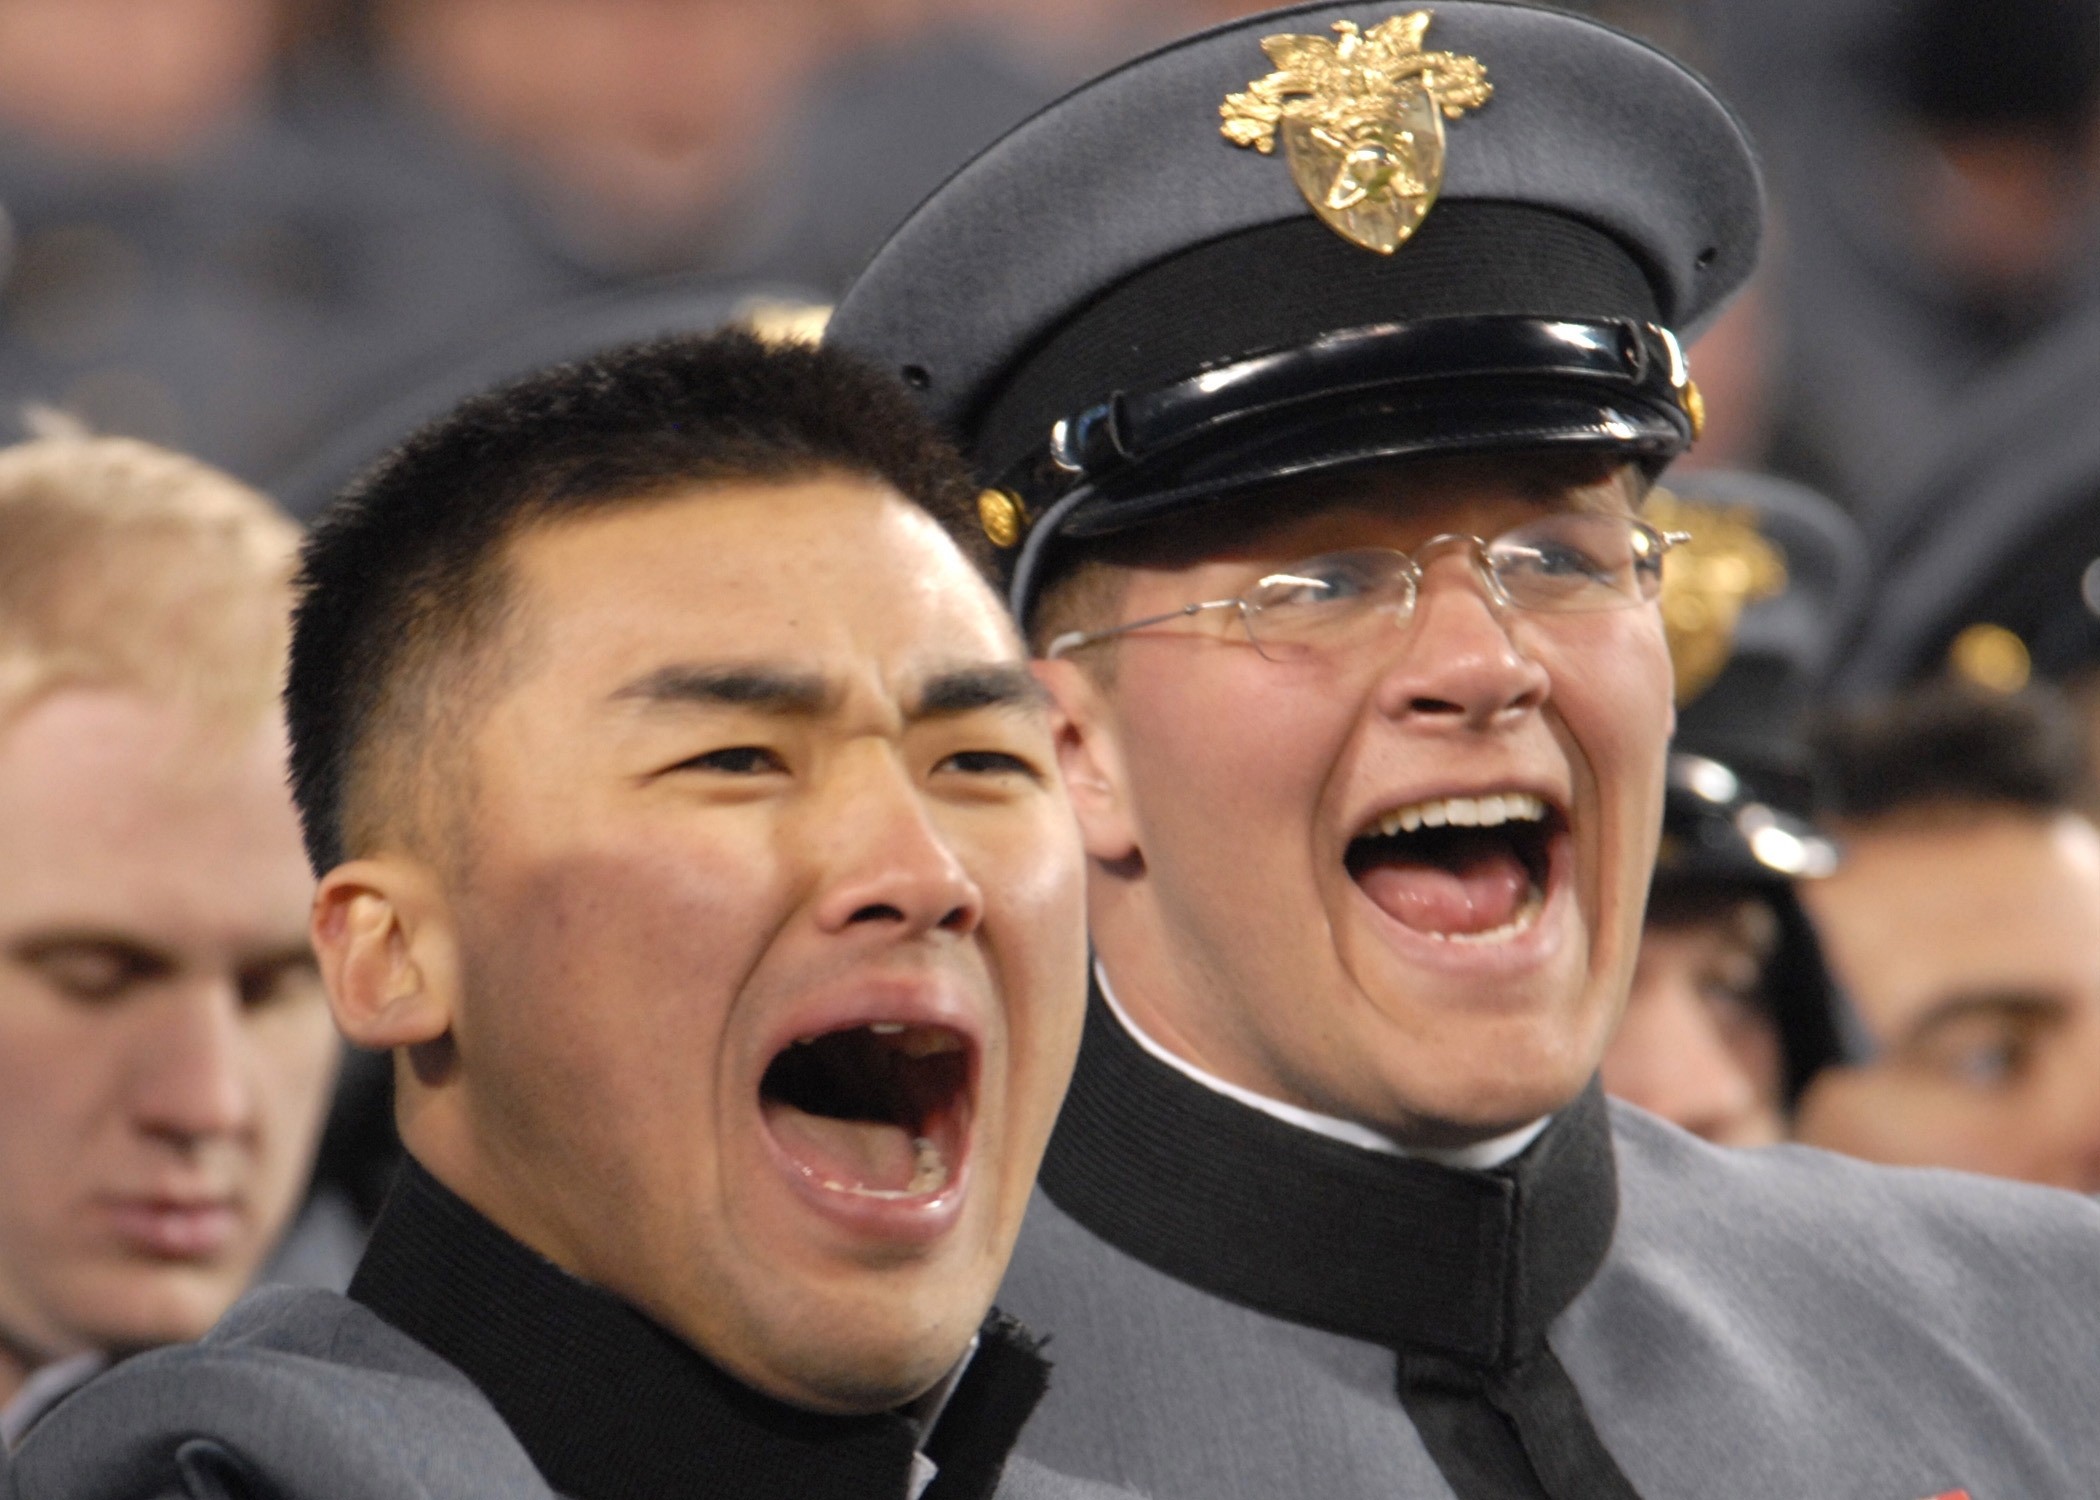 Millions tune in for ArmyNavy game Article The United States Army